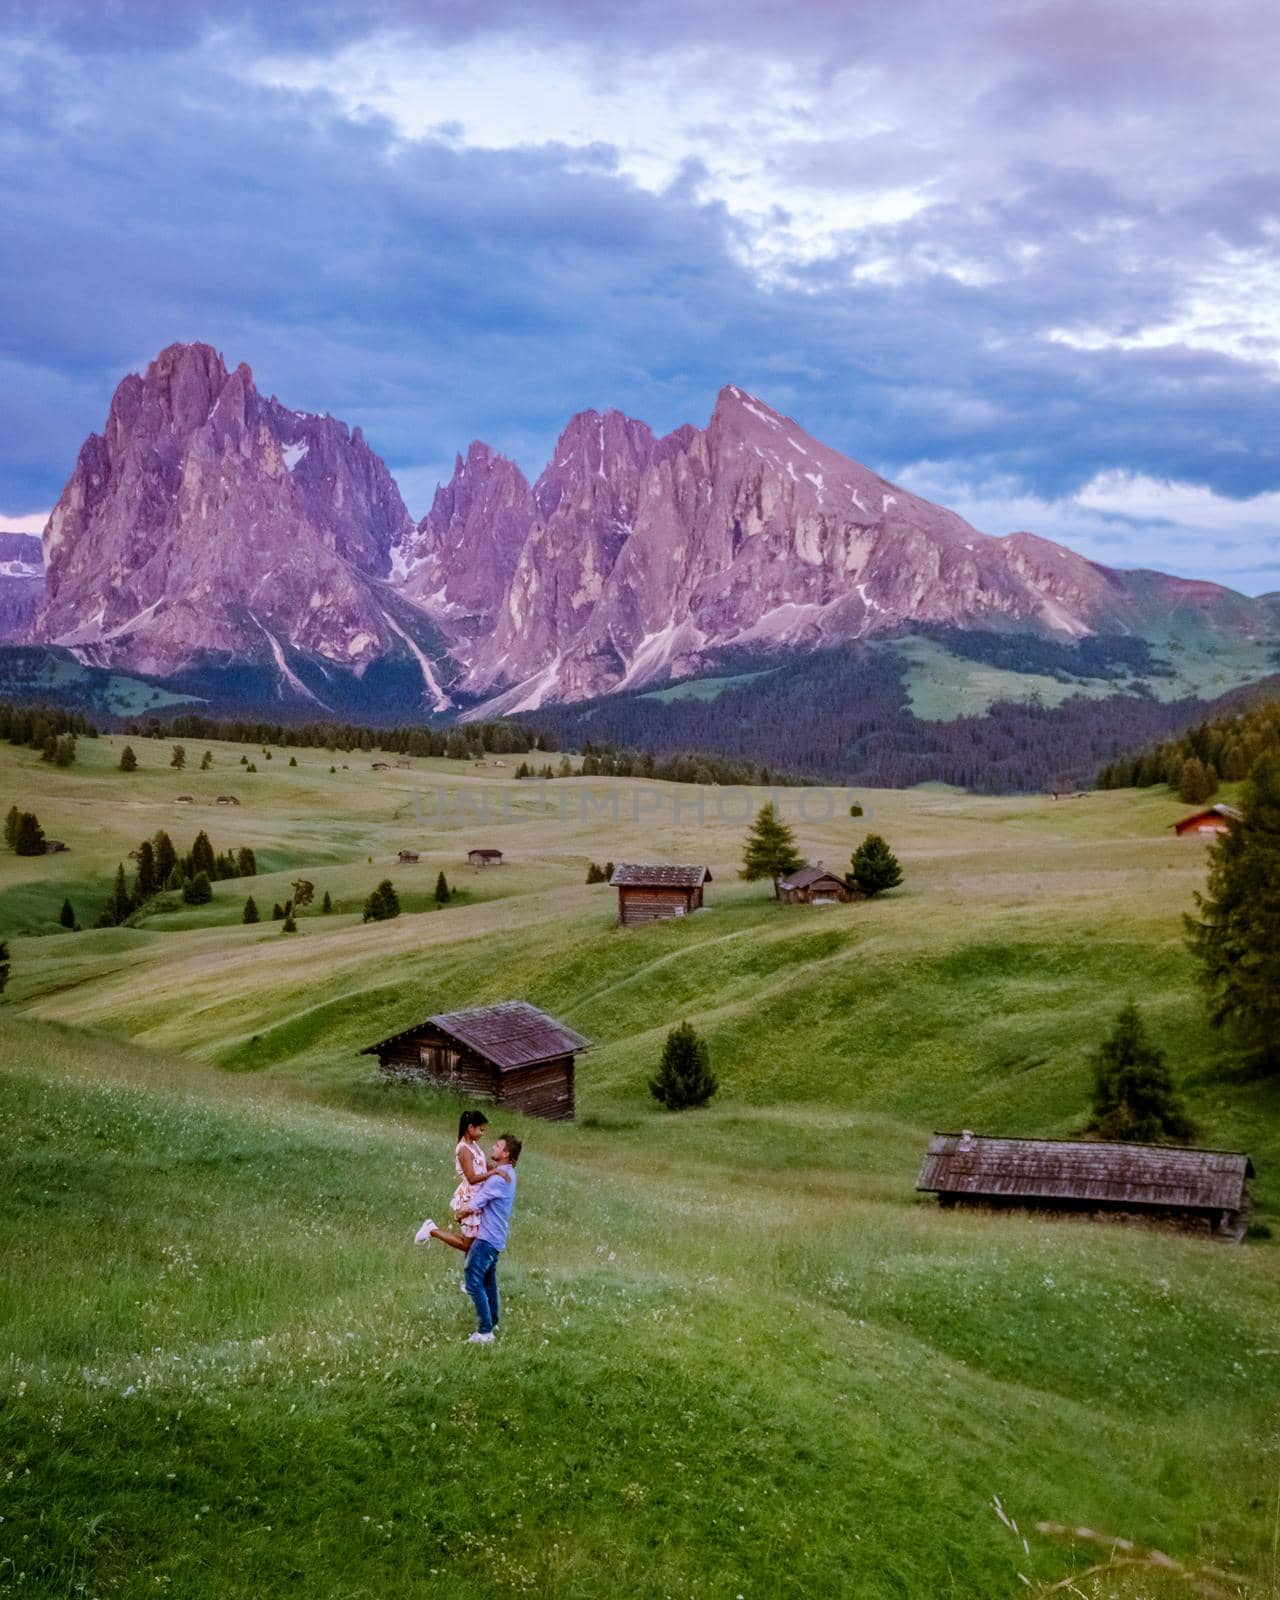 Alpe di Siusi - Seiser Alm with Sassolungo - Langkofel mountain group in background at sunset. Yellow spring flowers and wooden chalets in Dolomites, Trentino Alto Adige, South Tyrol, Italy, Europe. Summer weather with dark clouds rain, couple men and woman on vacation in the Dolomites Italy